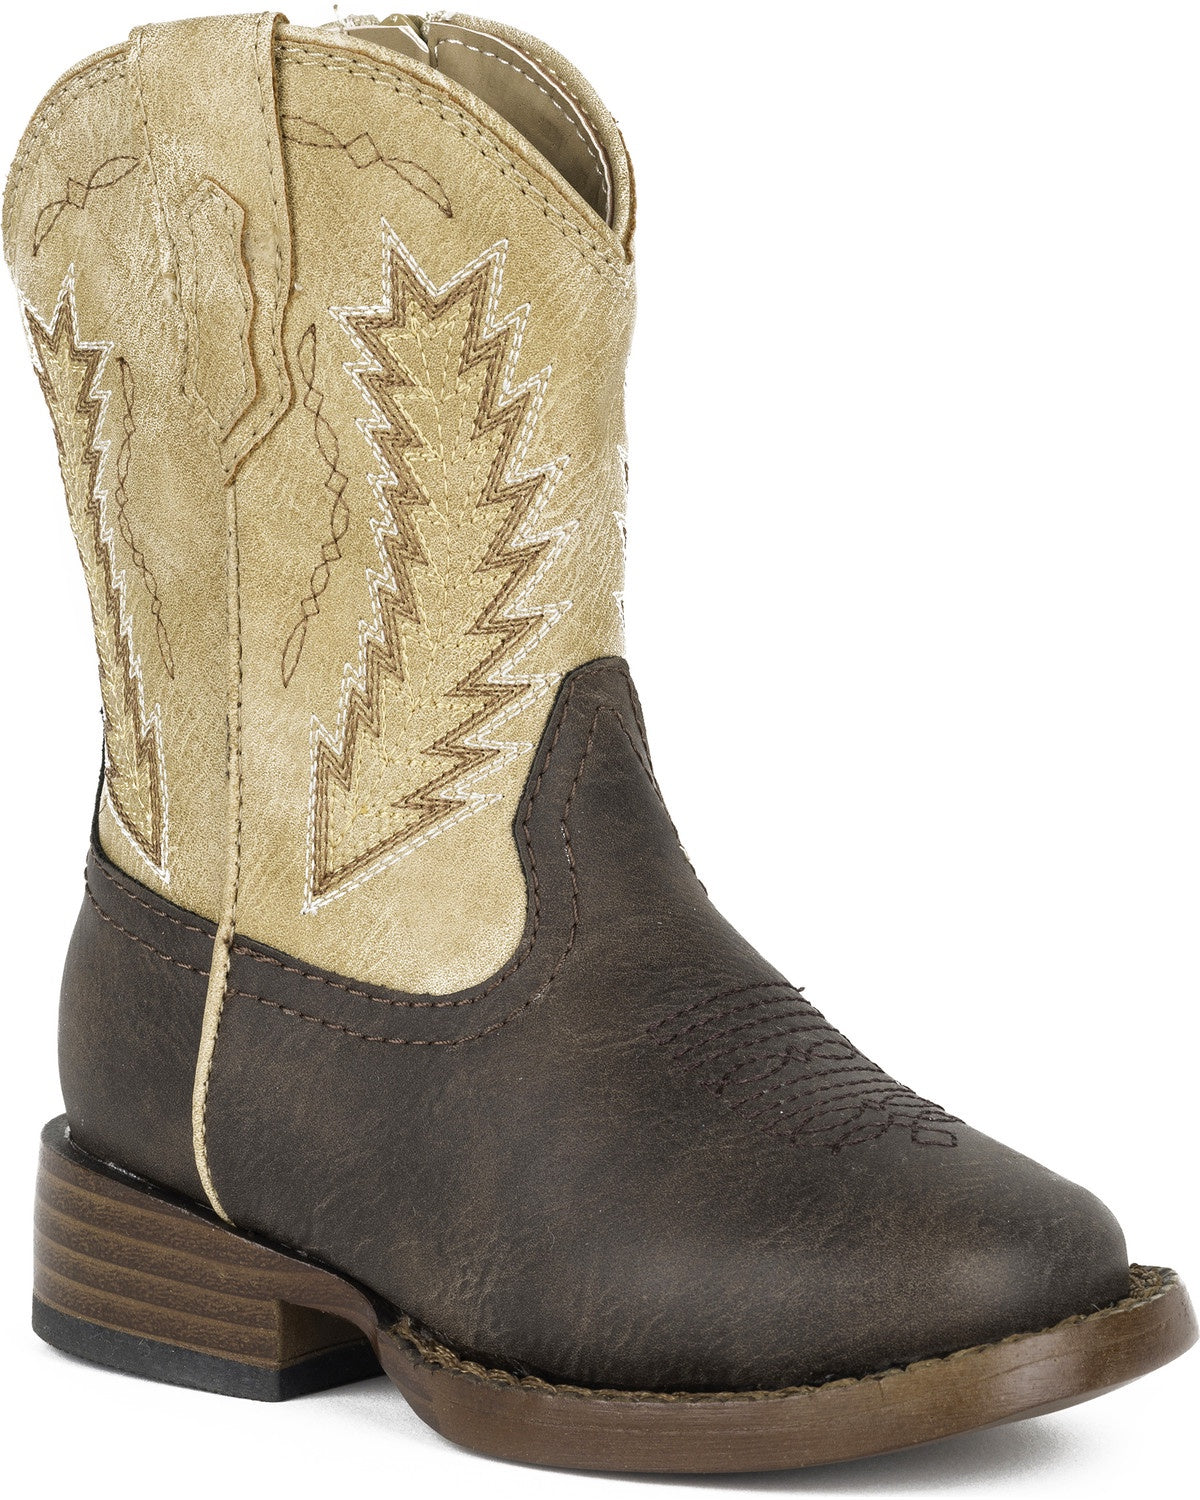 Roper Toddler Billy Brown/Cream Boots